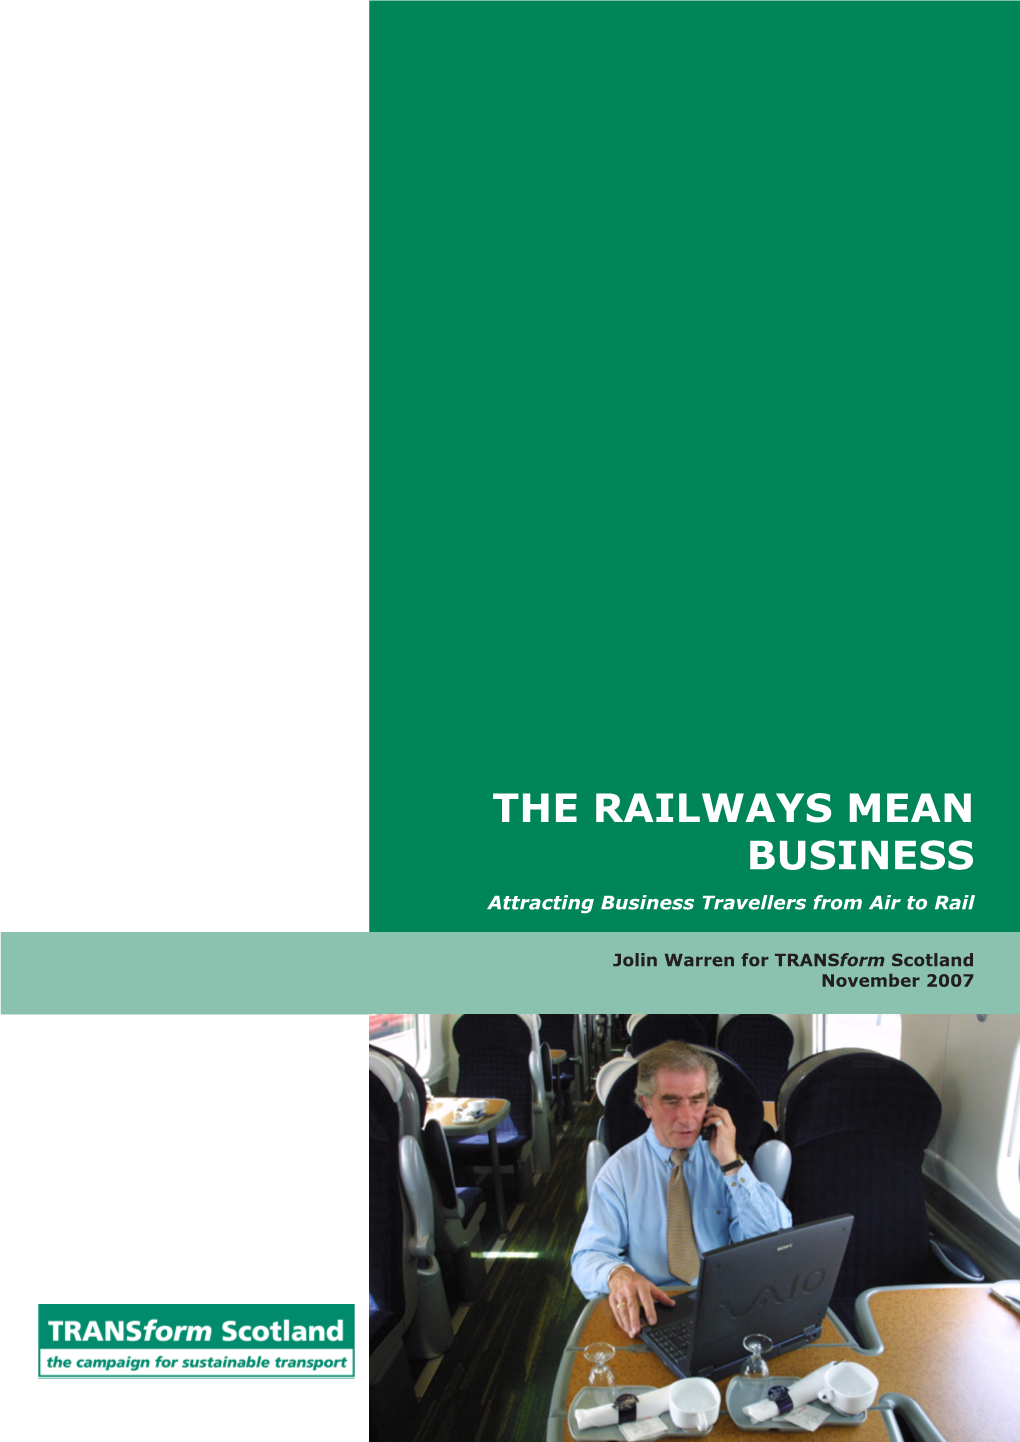 THE RAILWAYS MEAN BUSINESS Attracting Business Travellers from Air to Rail